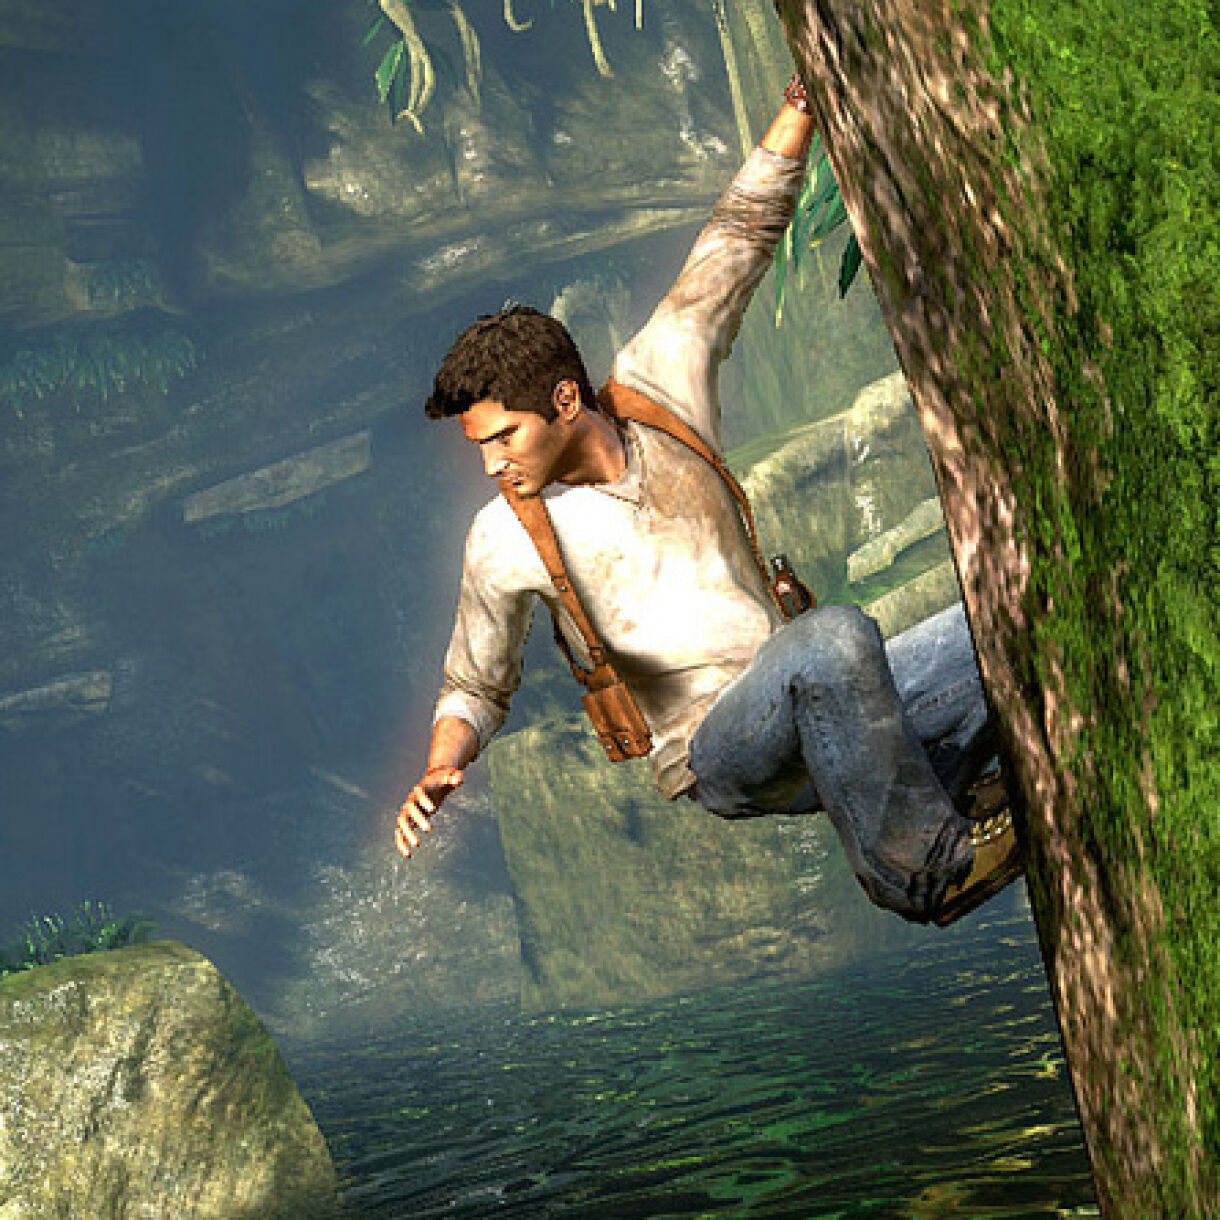 Naughty Dog says it's still struggling with multi-project development